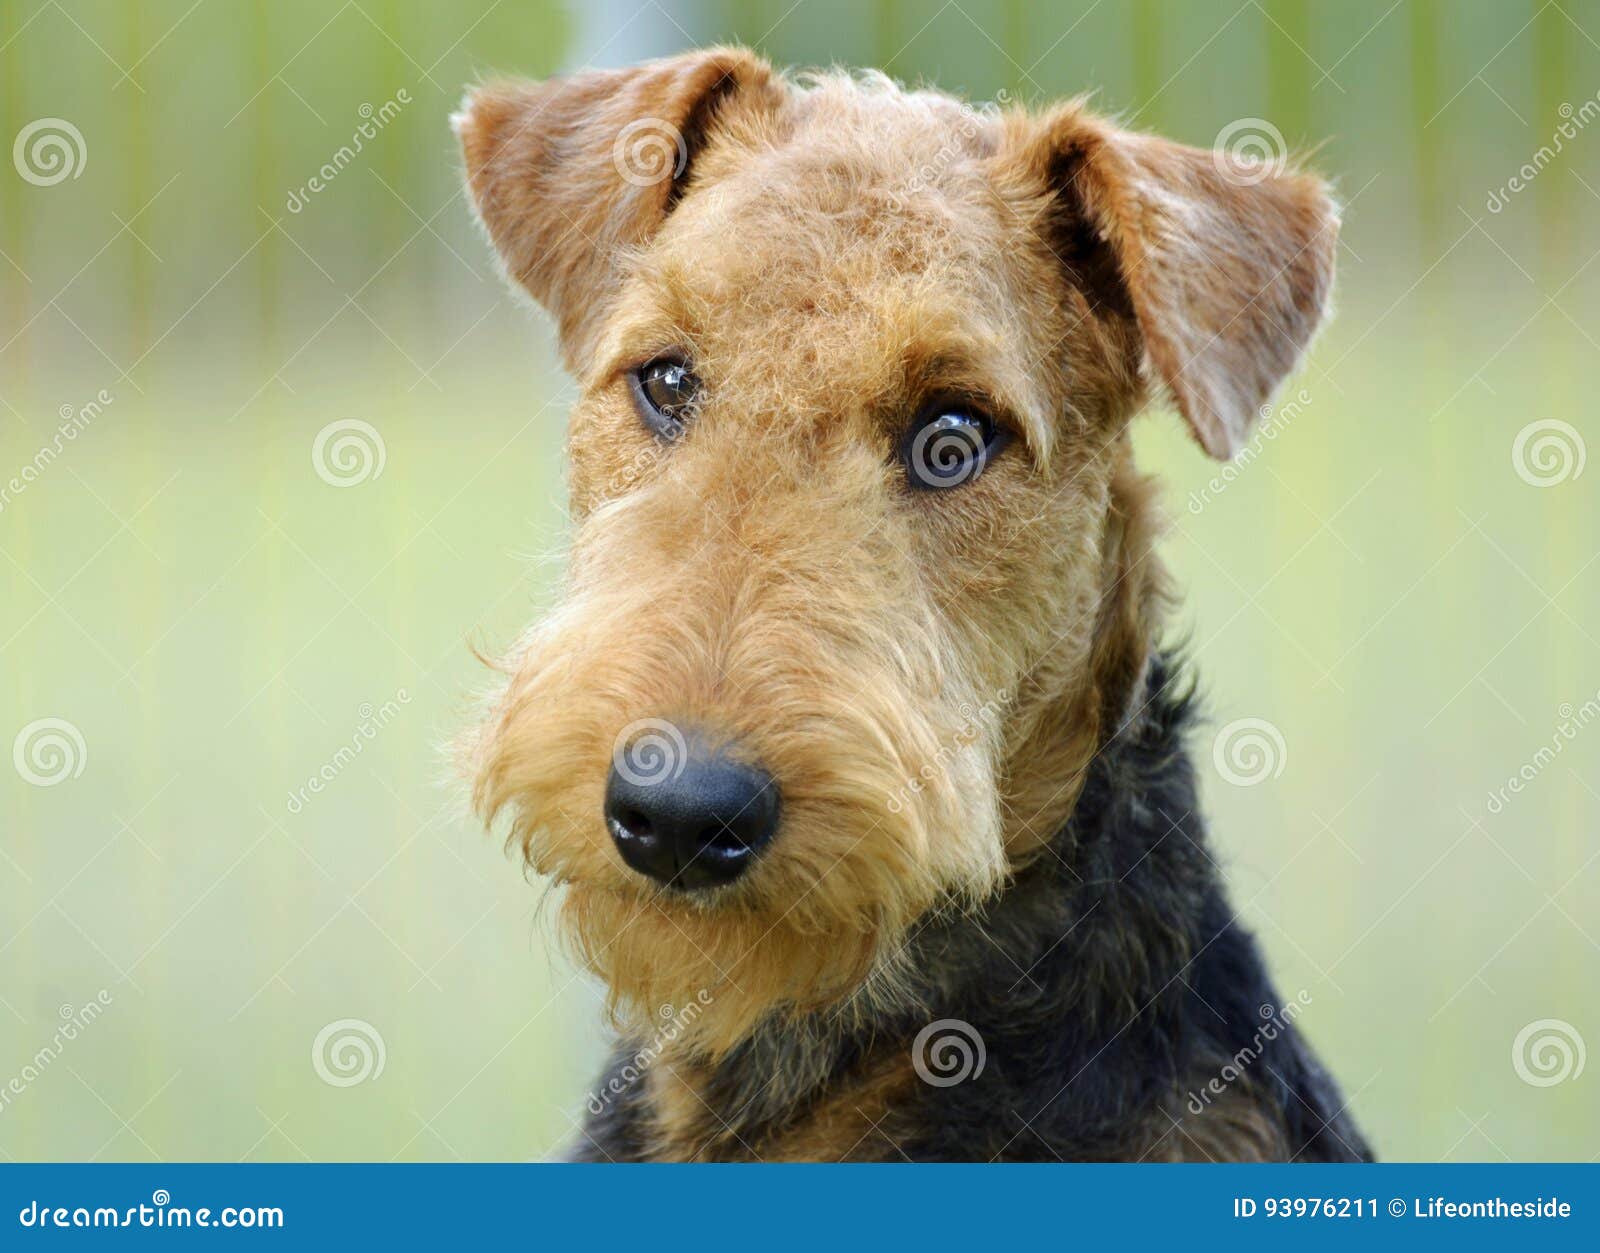 portrait young airedale terrier dog green background